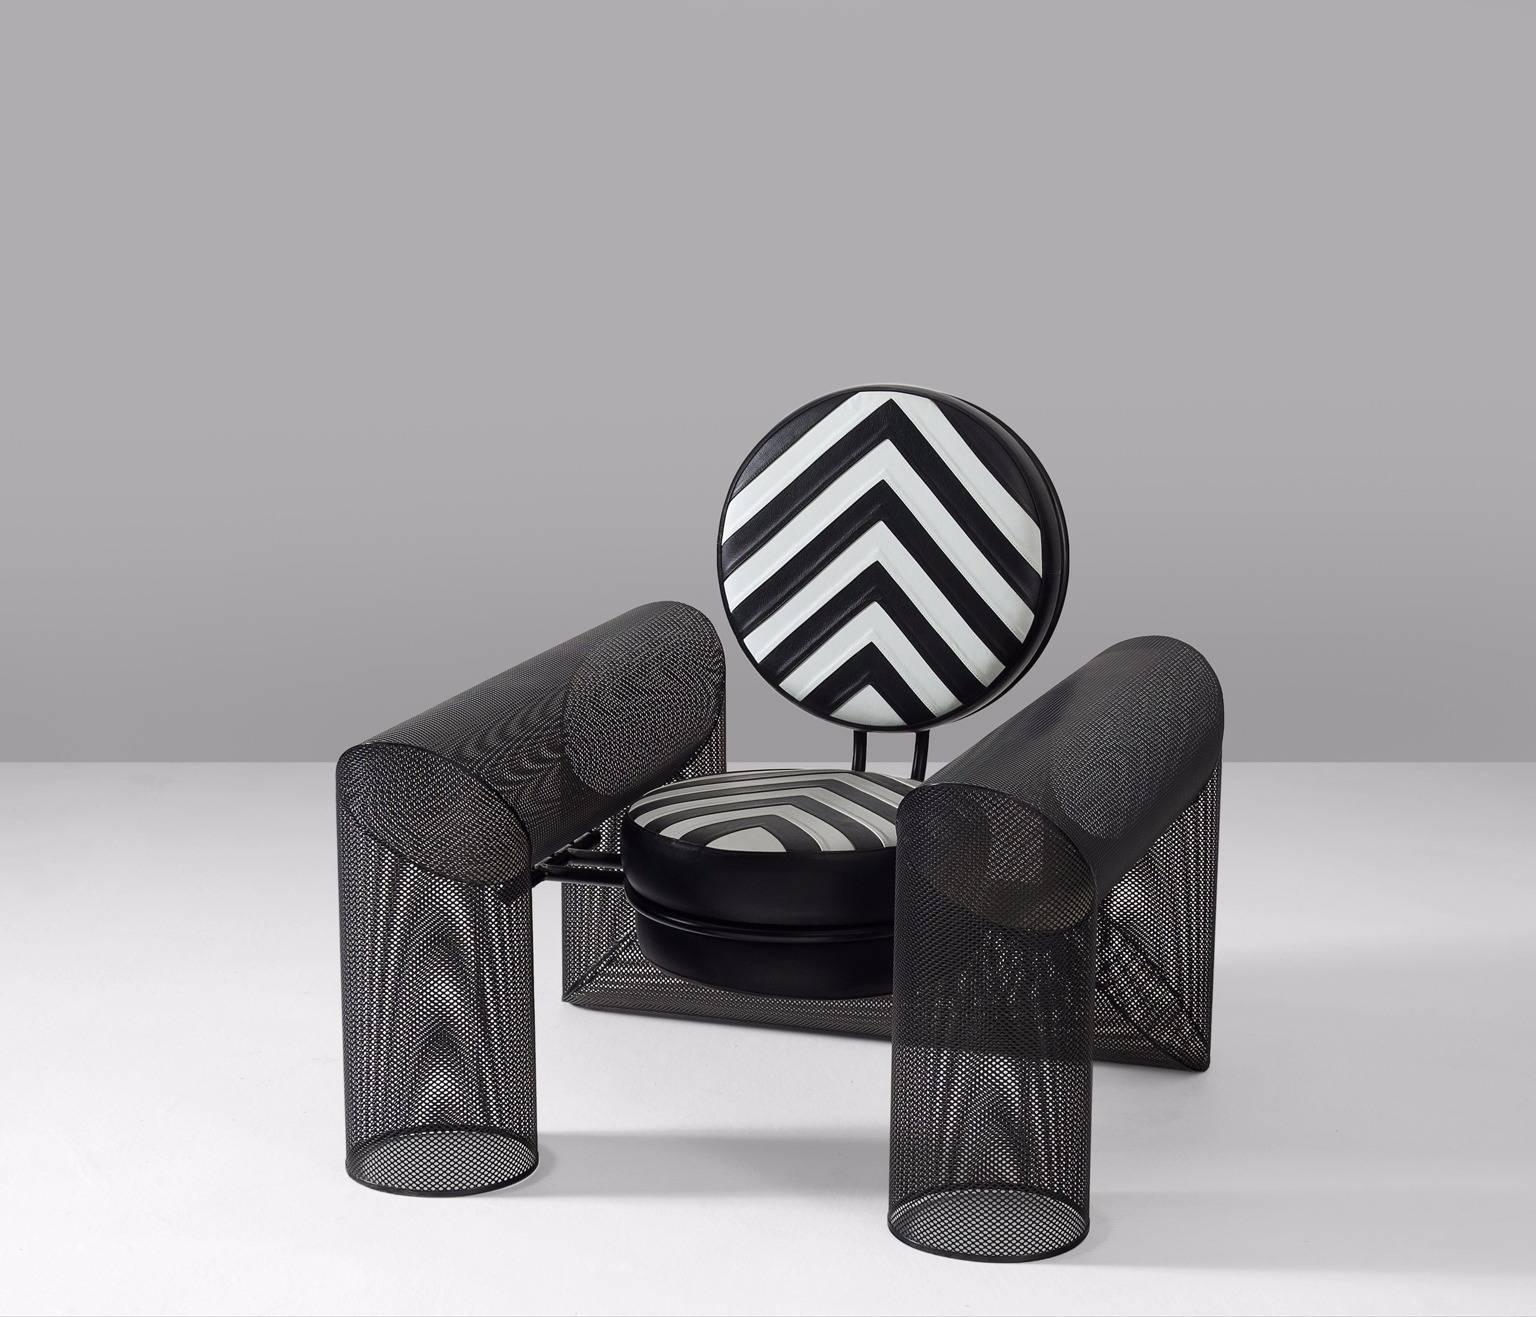 Lounge chair 'Prince/Sesta', metal, mesh and leather by Mario Botta for Alias, Italy, 1985.

Lounge chair by Italian architect Mario Botta. The frame is from black coated mesh. Intelligent one-lined tubular frame with the circle as repetitive